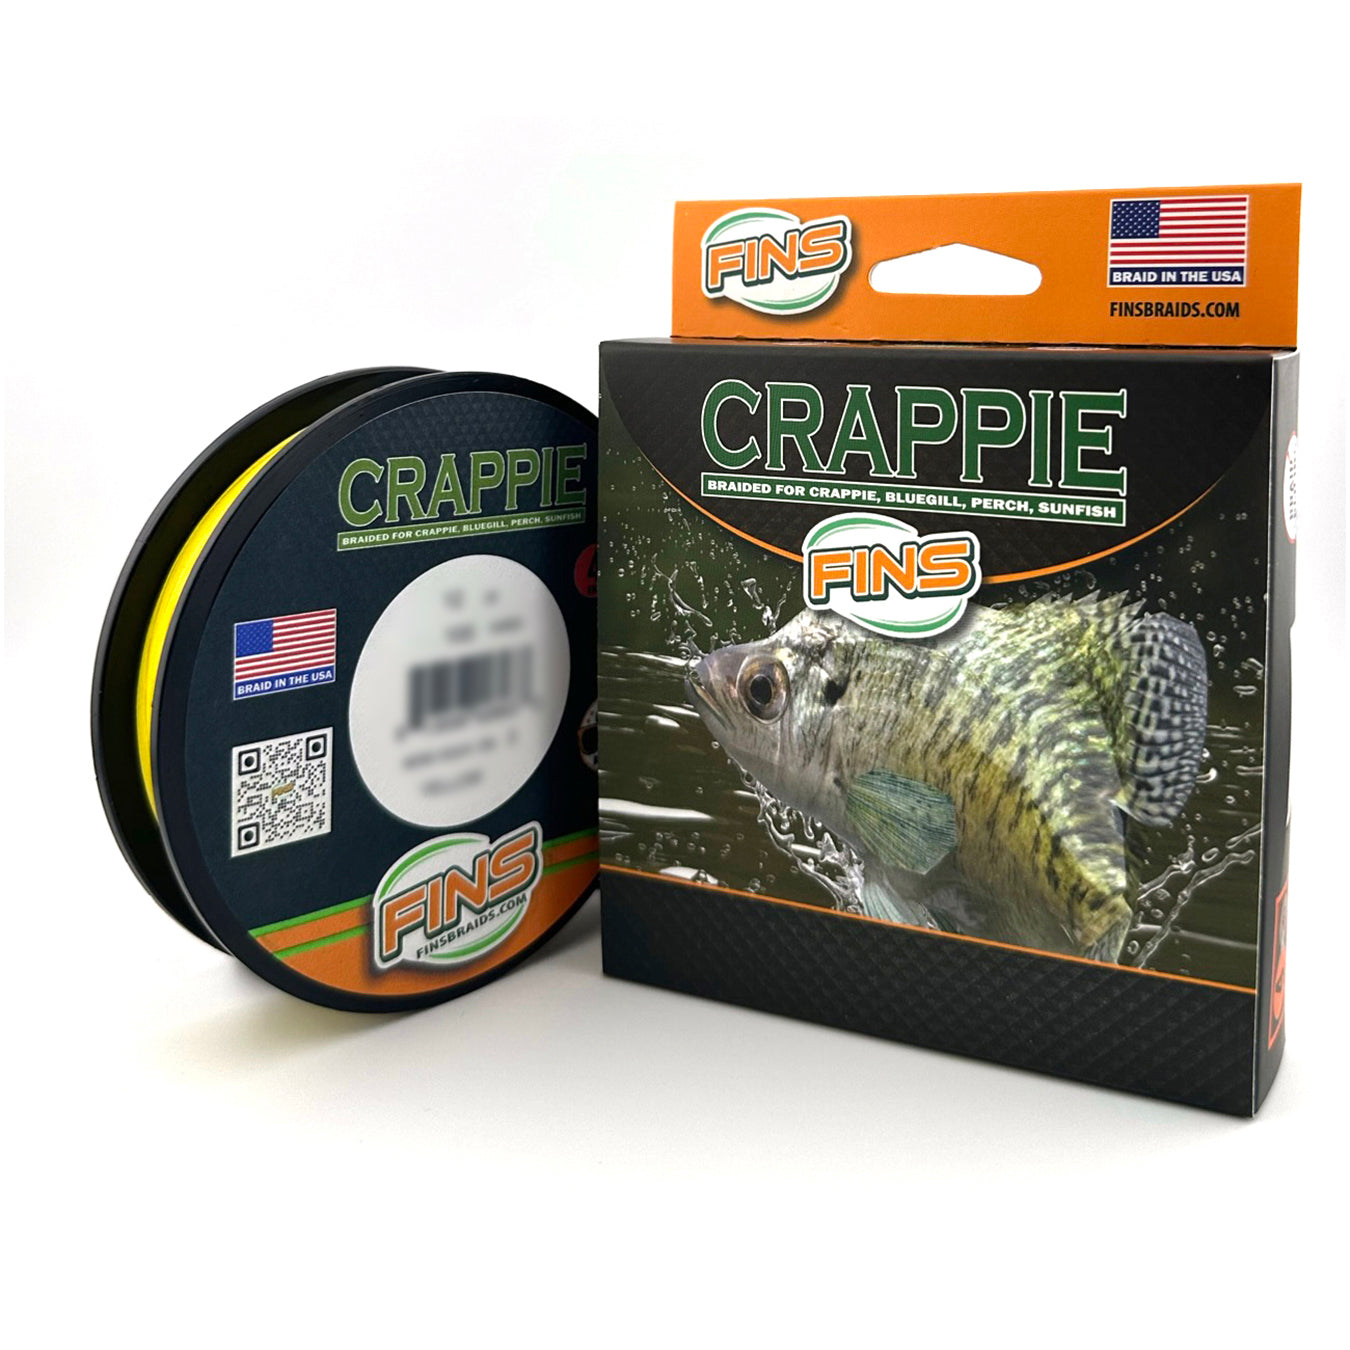 FISHLUND Braided Fishing Line, Featured Colorfast Fishing Line